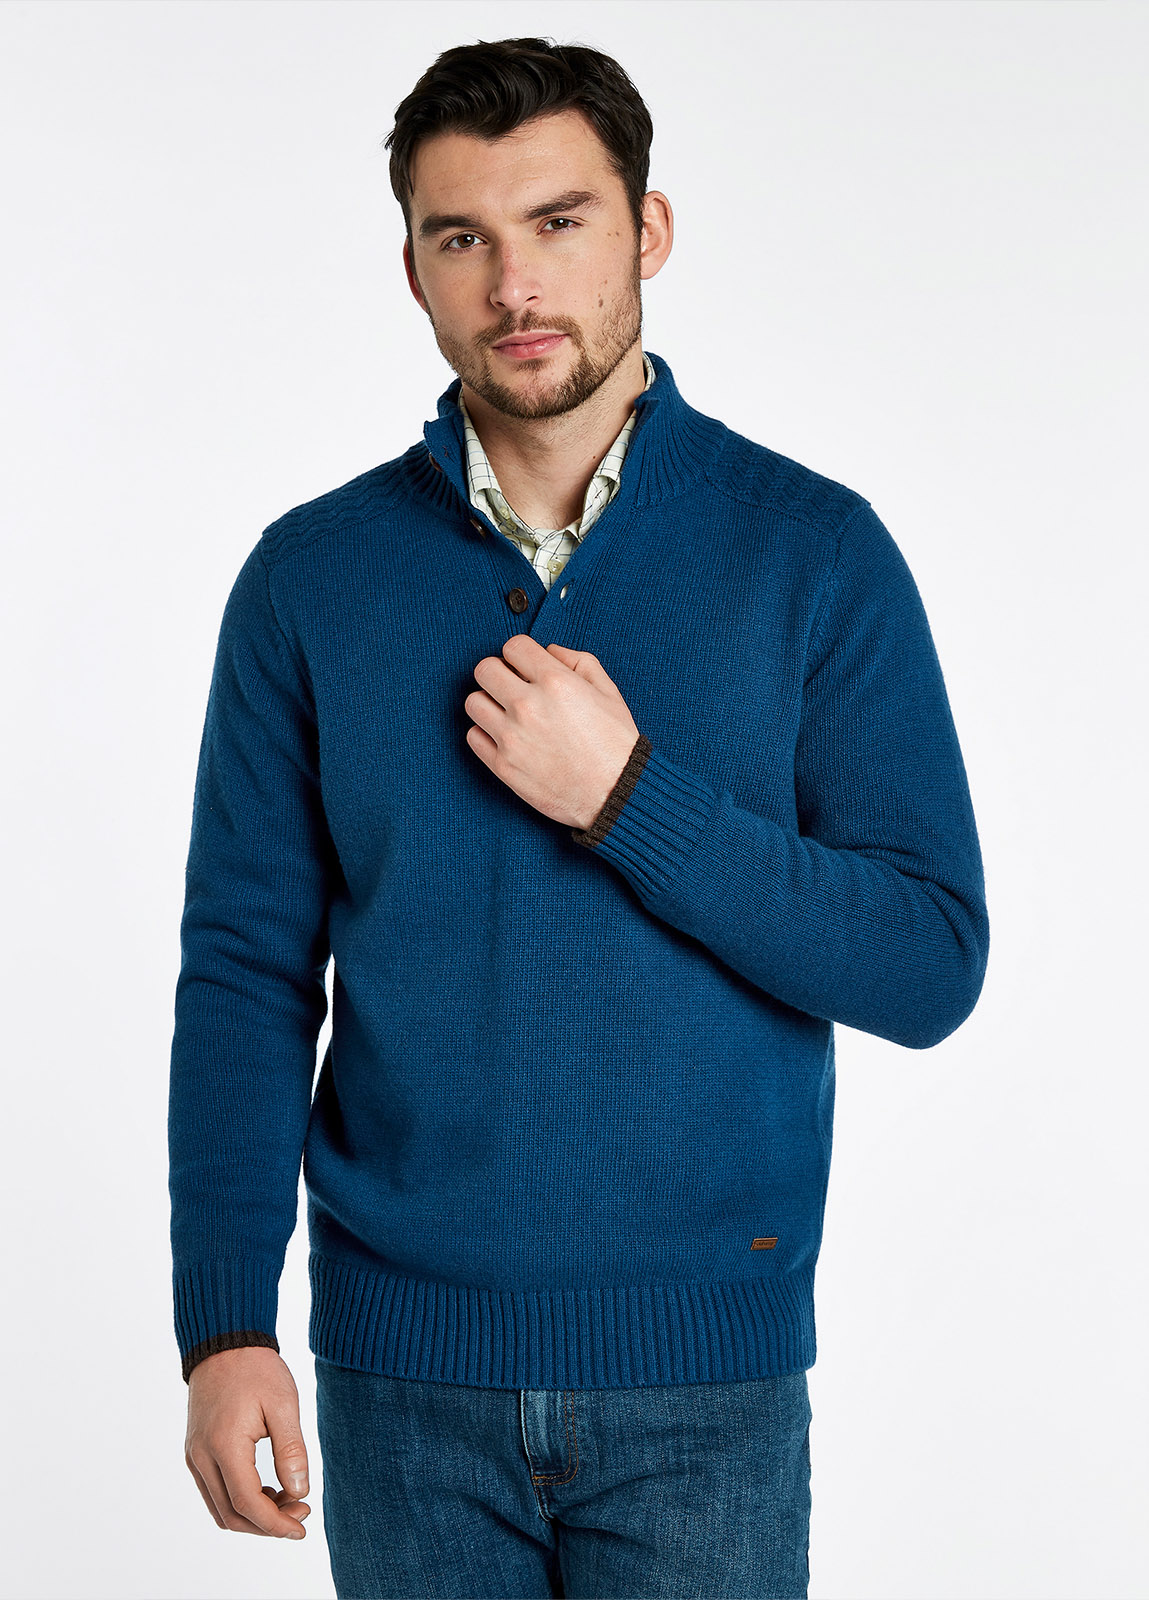 Parkplace Knitted Sweater - Peacock Blue